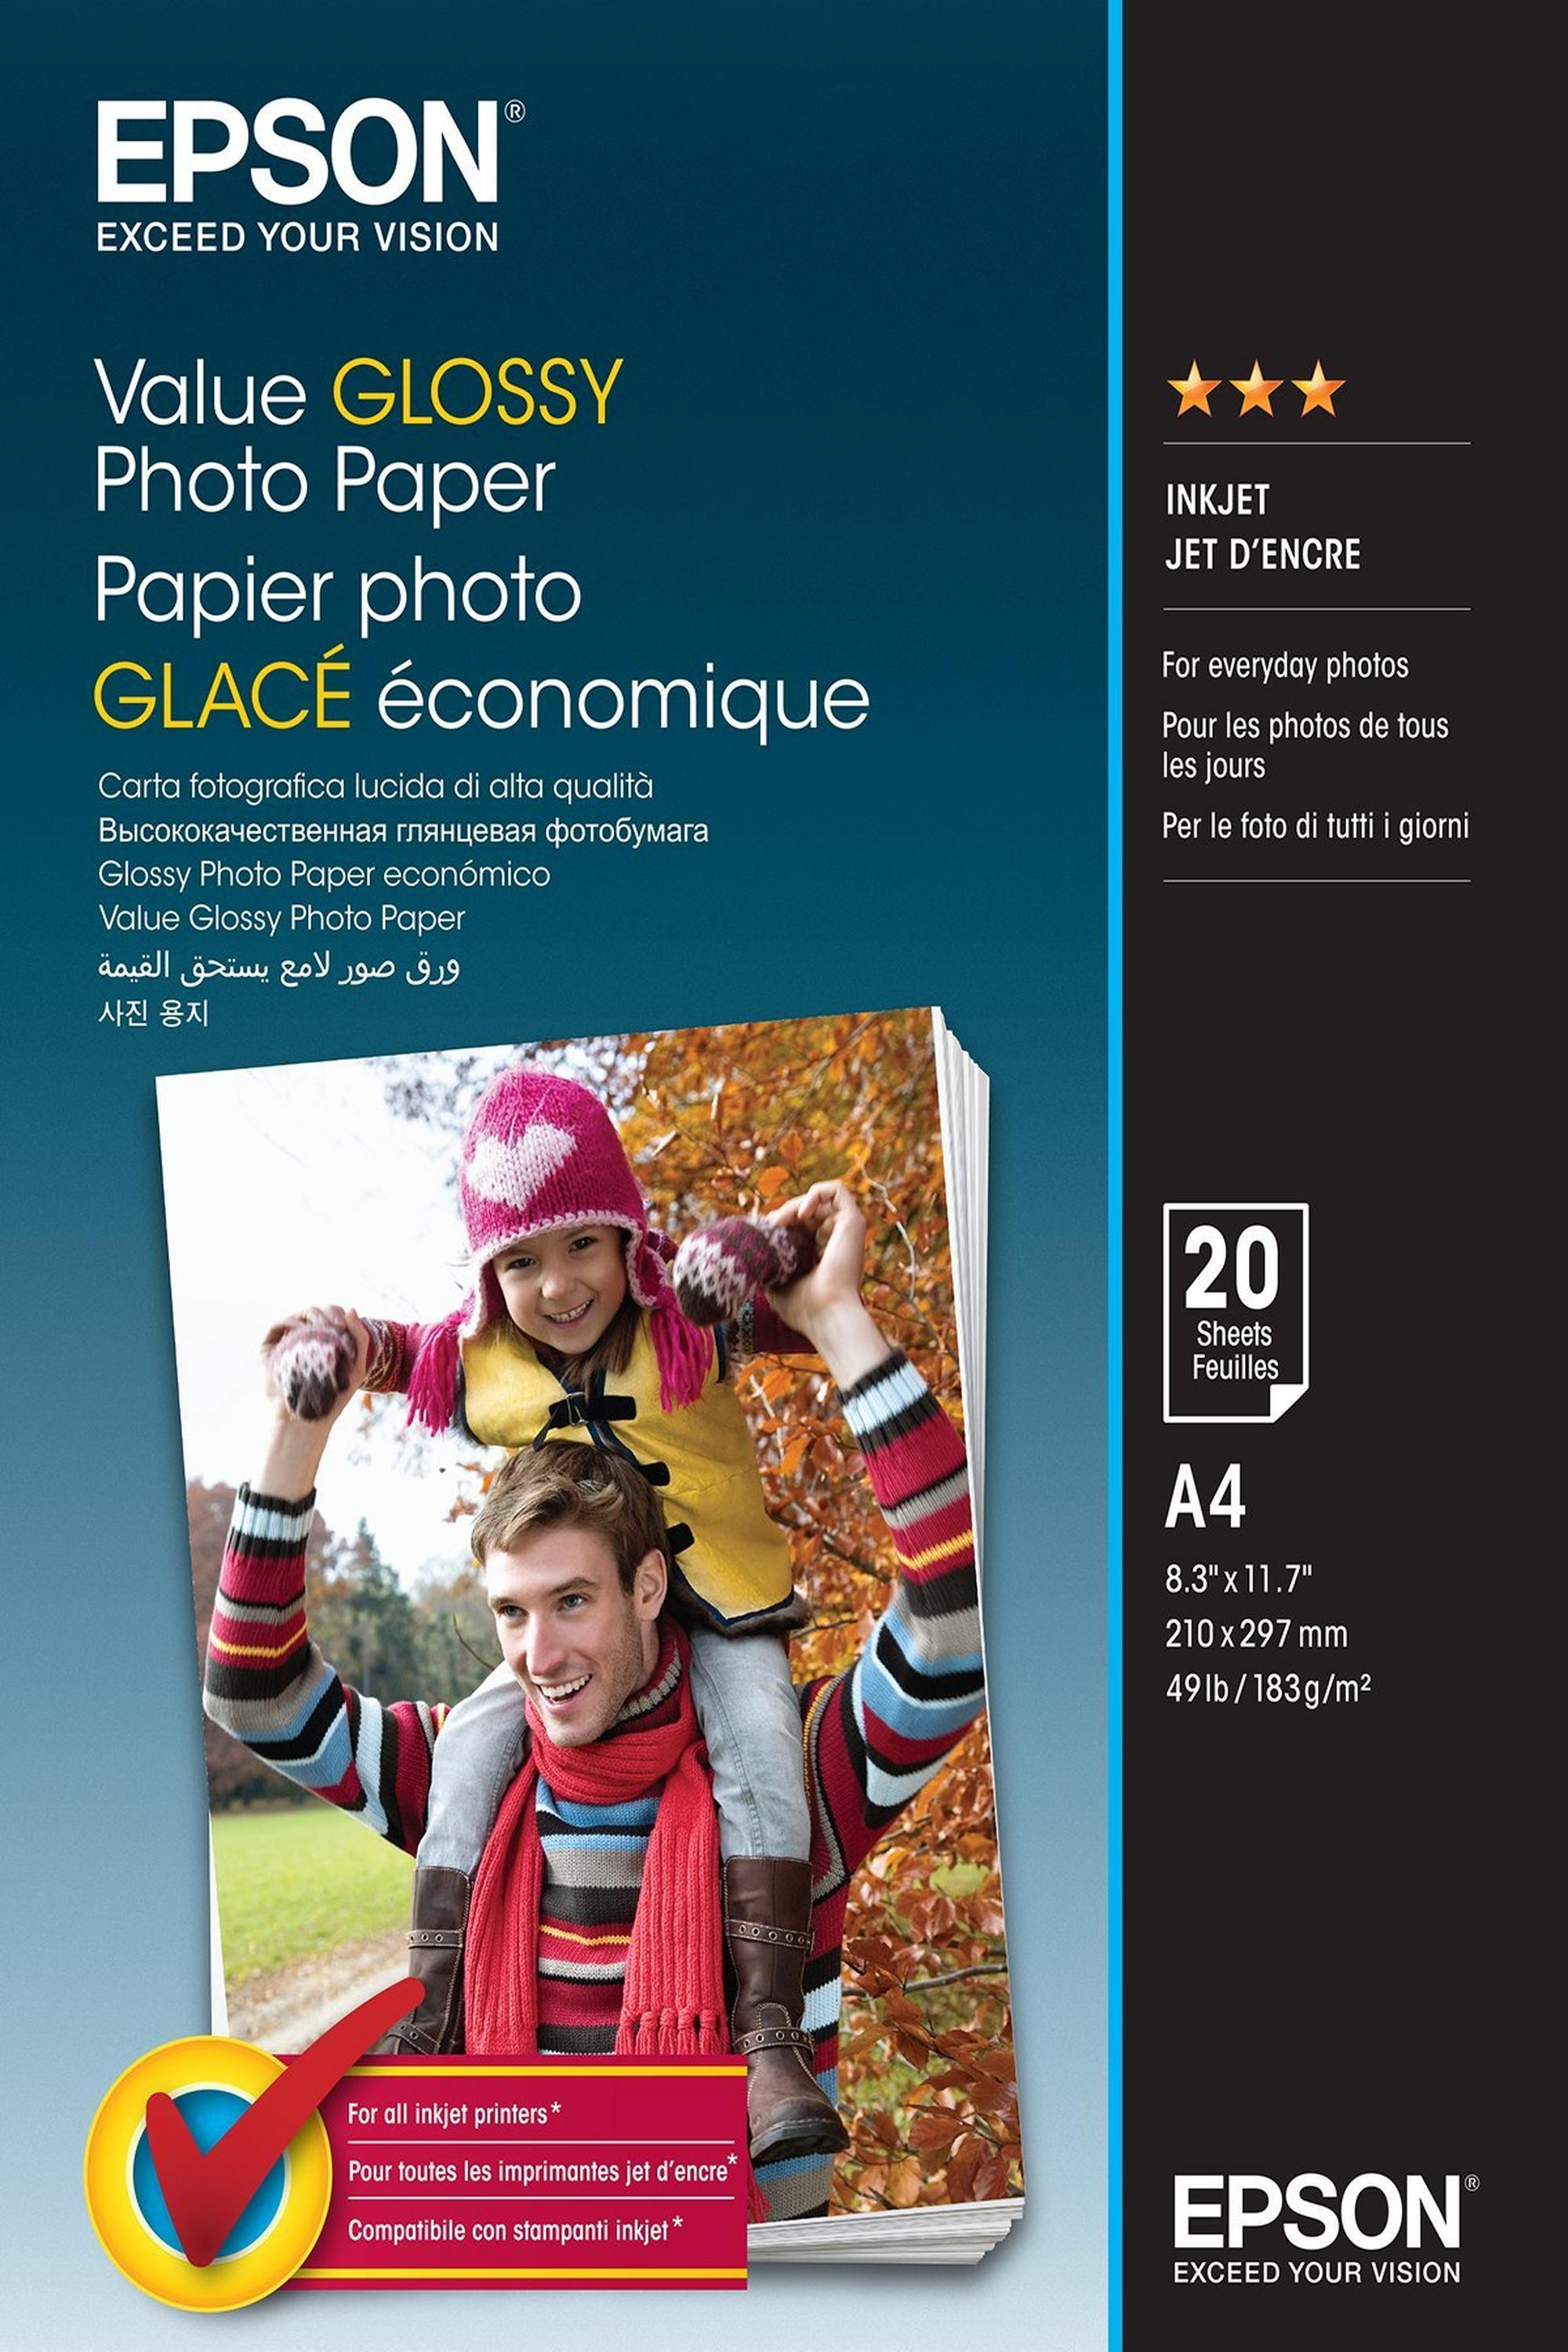 Epson Value Glossy Photo Paper - A4, 183g/m² - 20 sheets